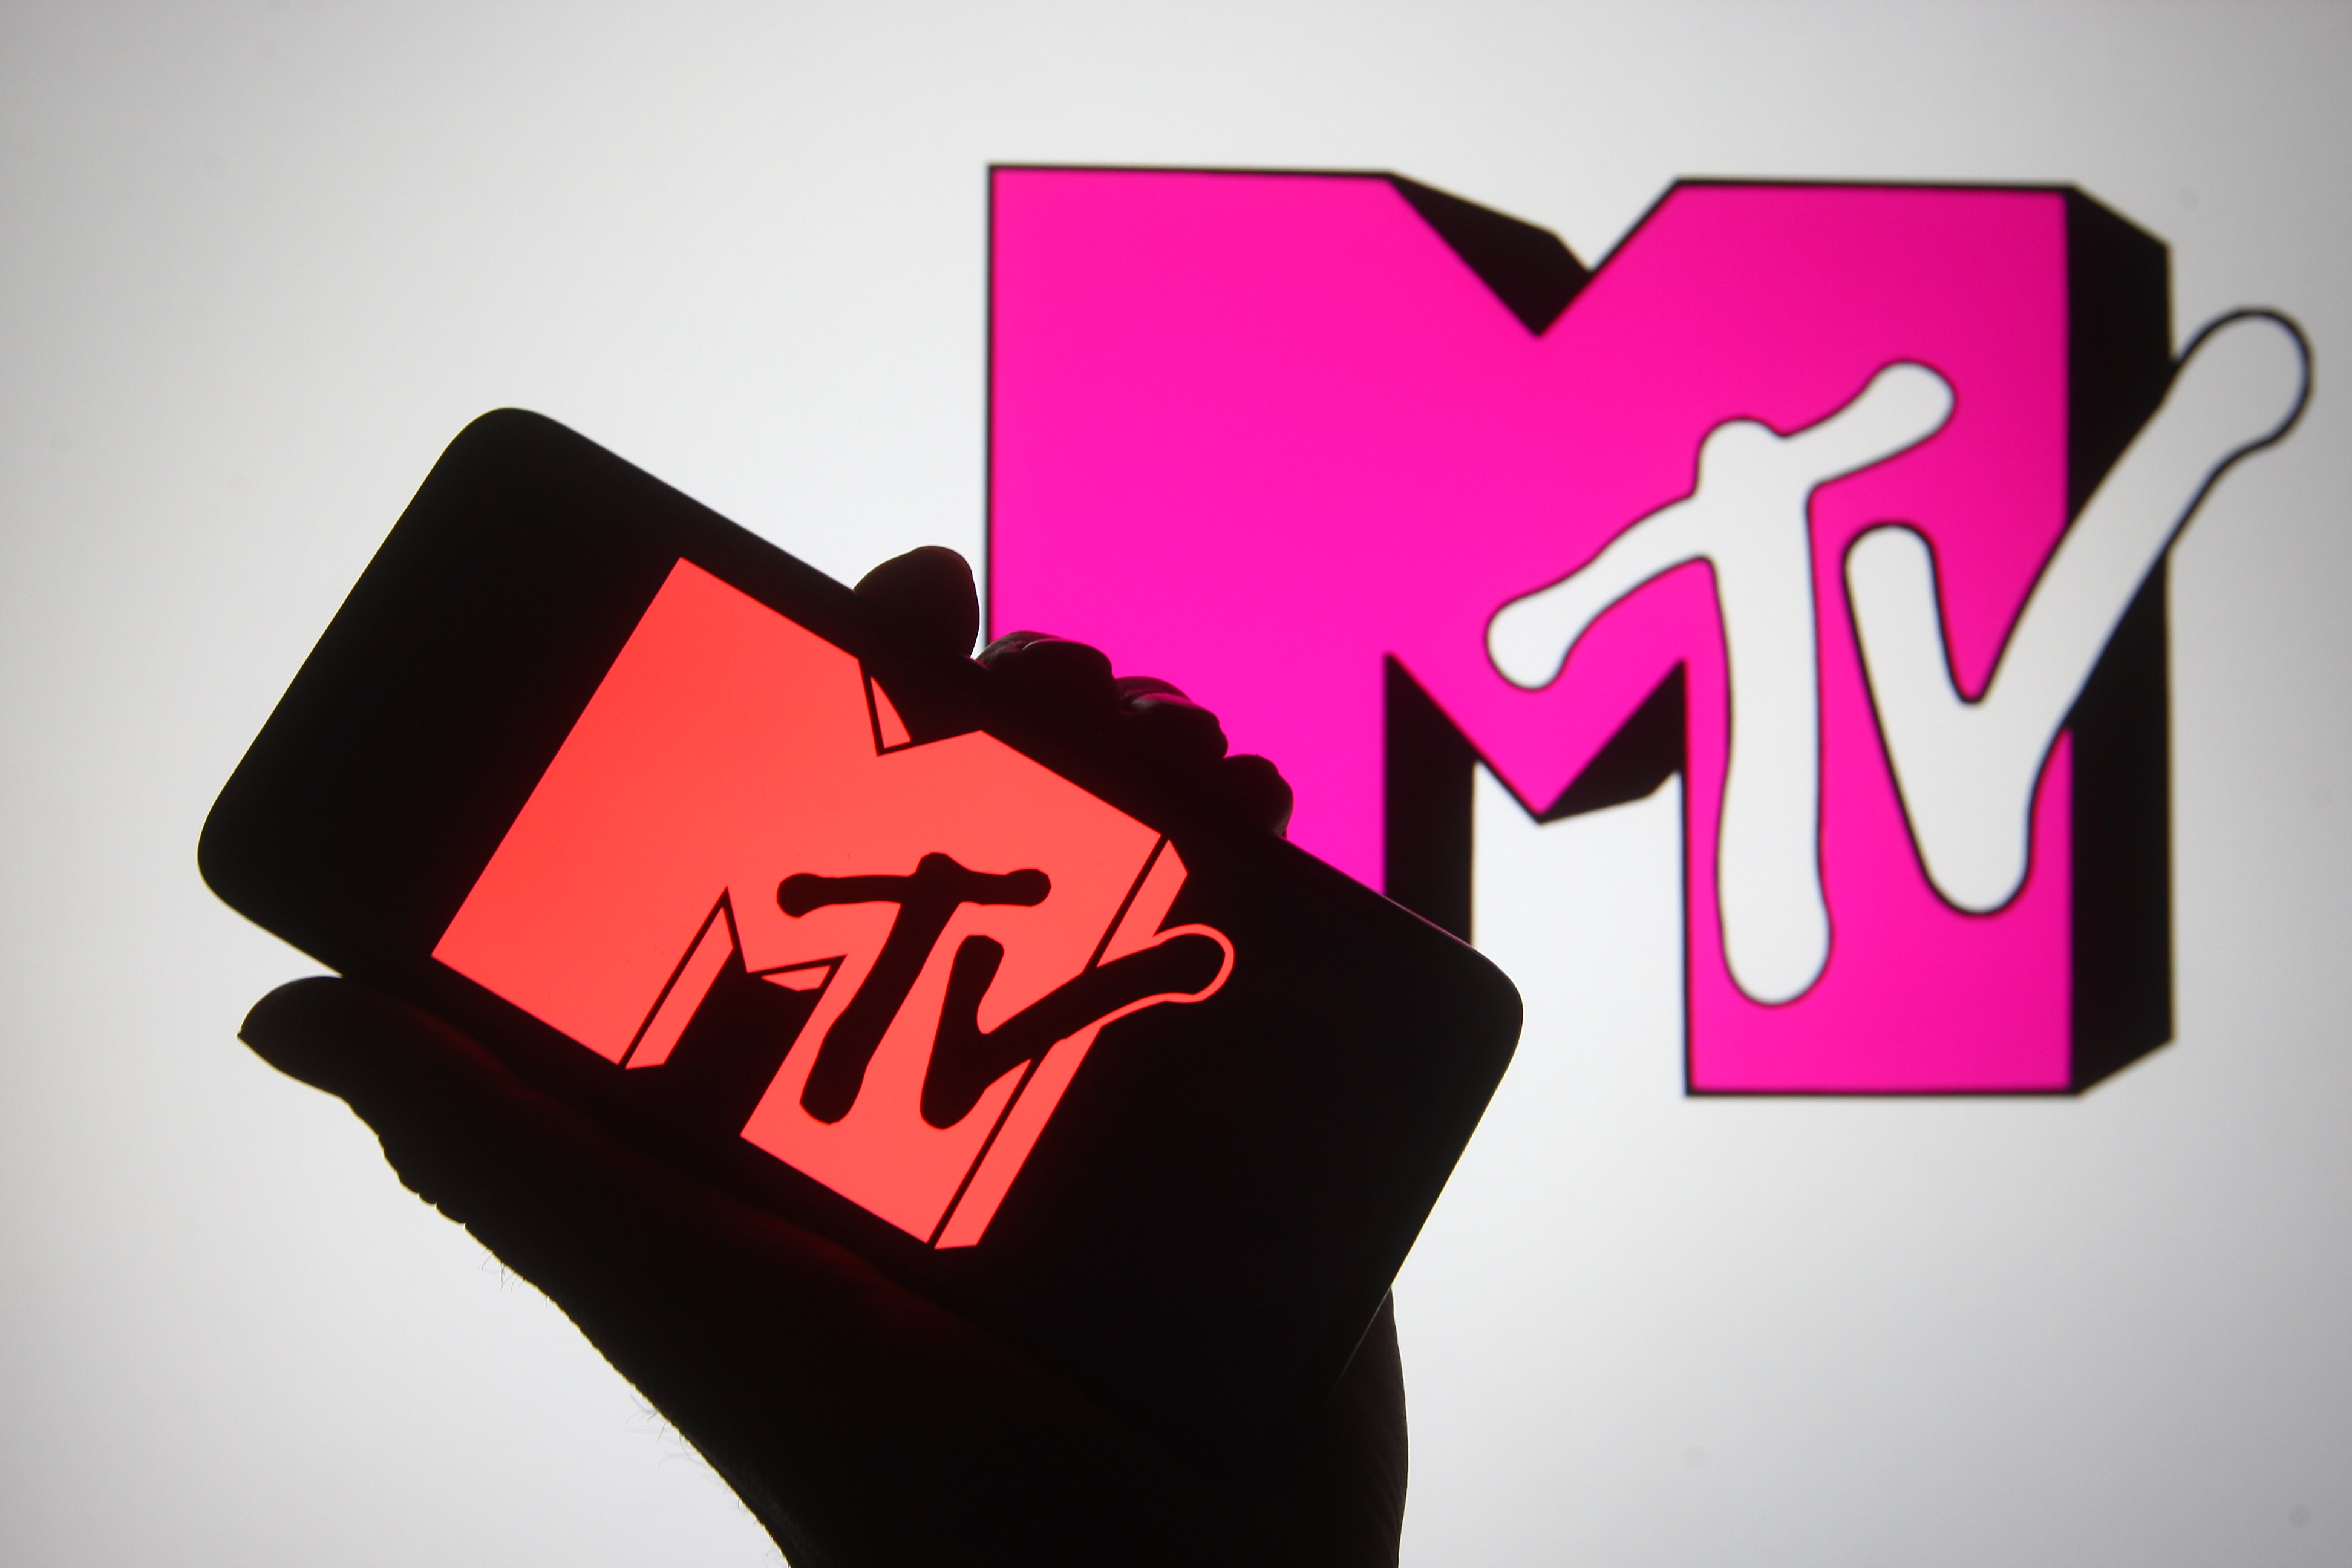 In this photo illustration a silhouette hand is seen holding a smartphone with MTV channel logo on its screen